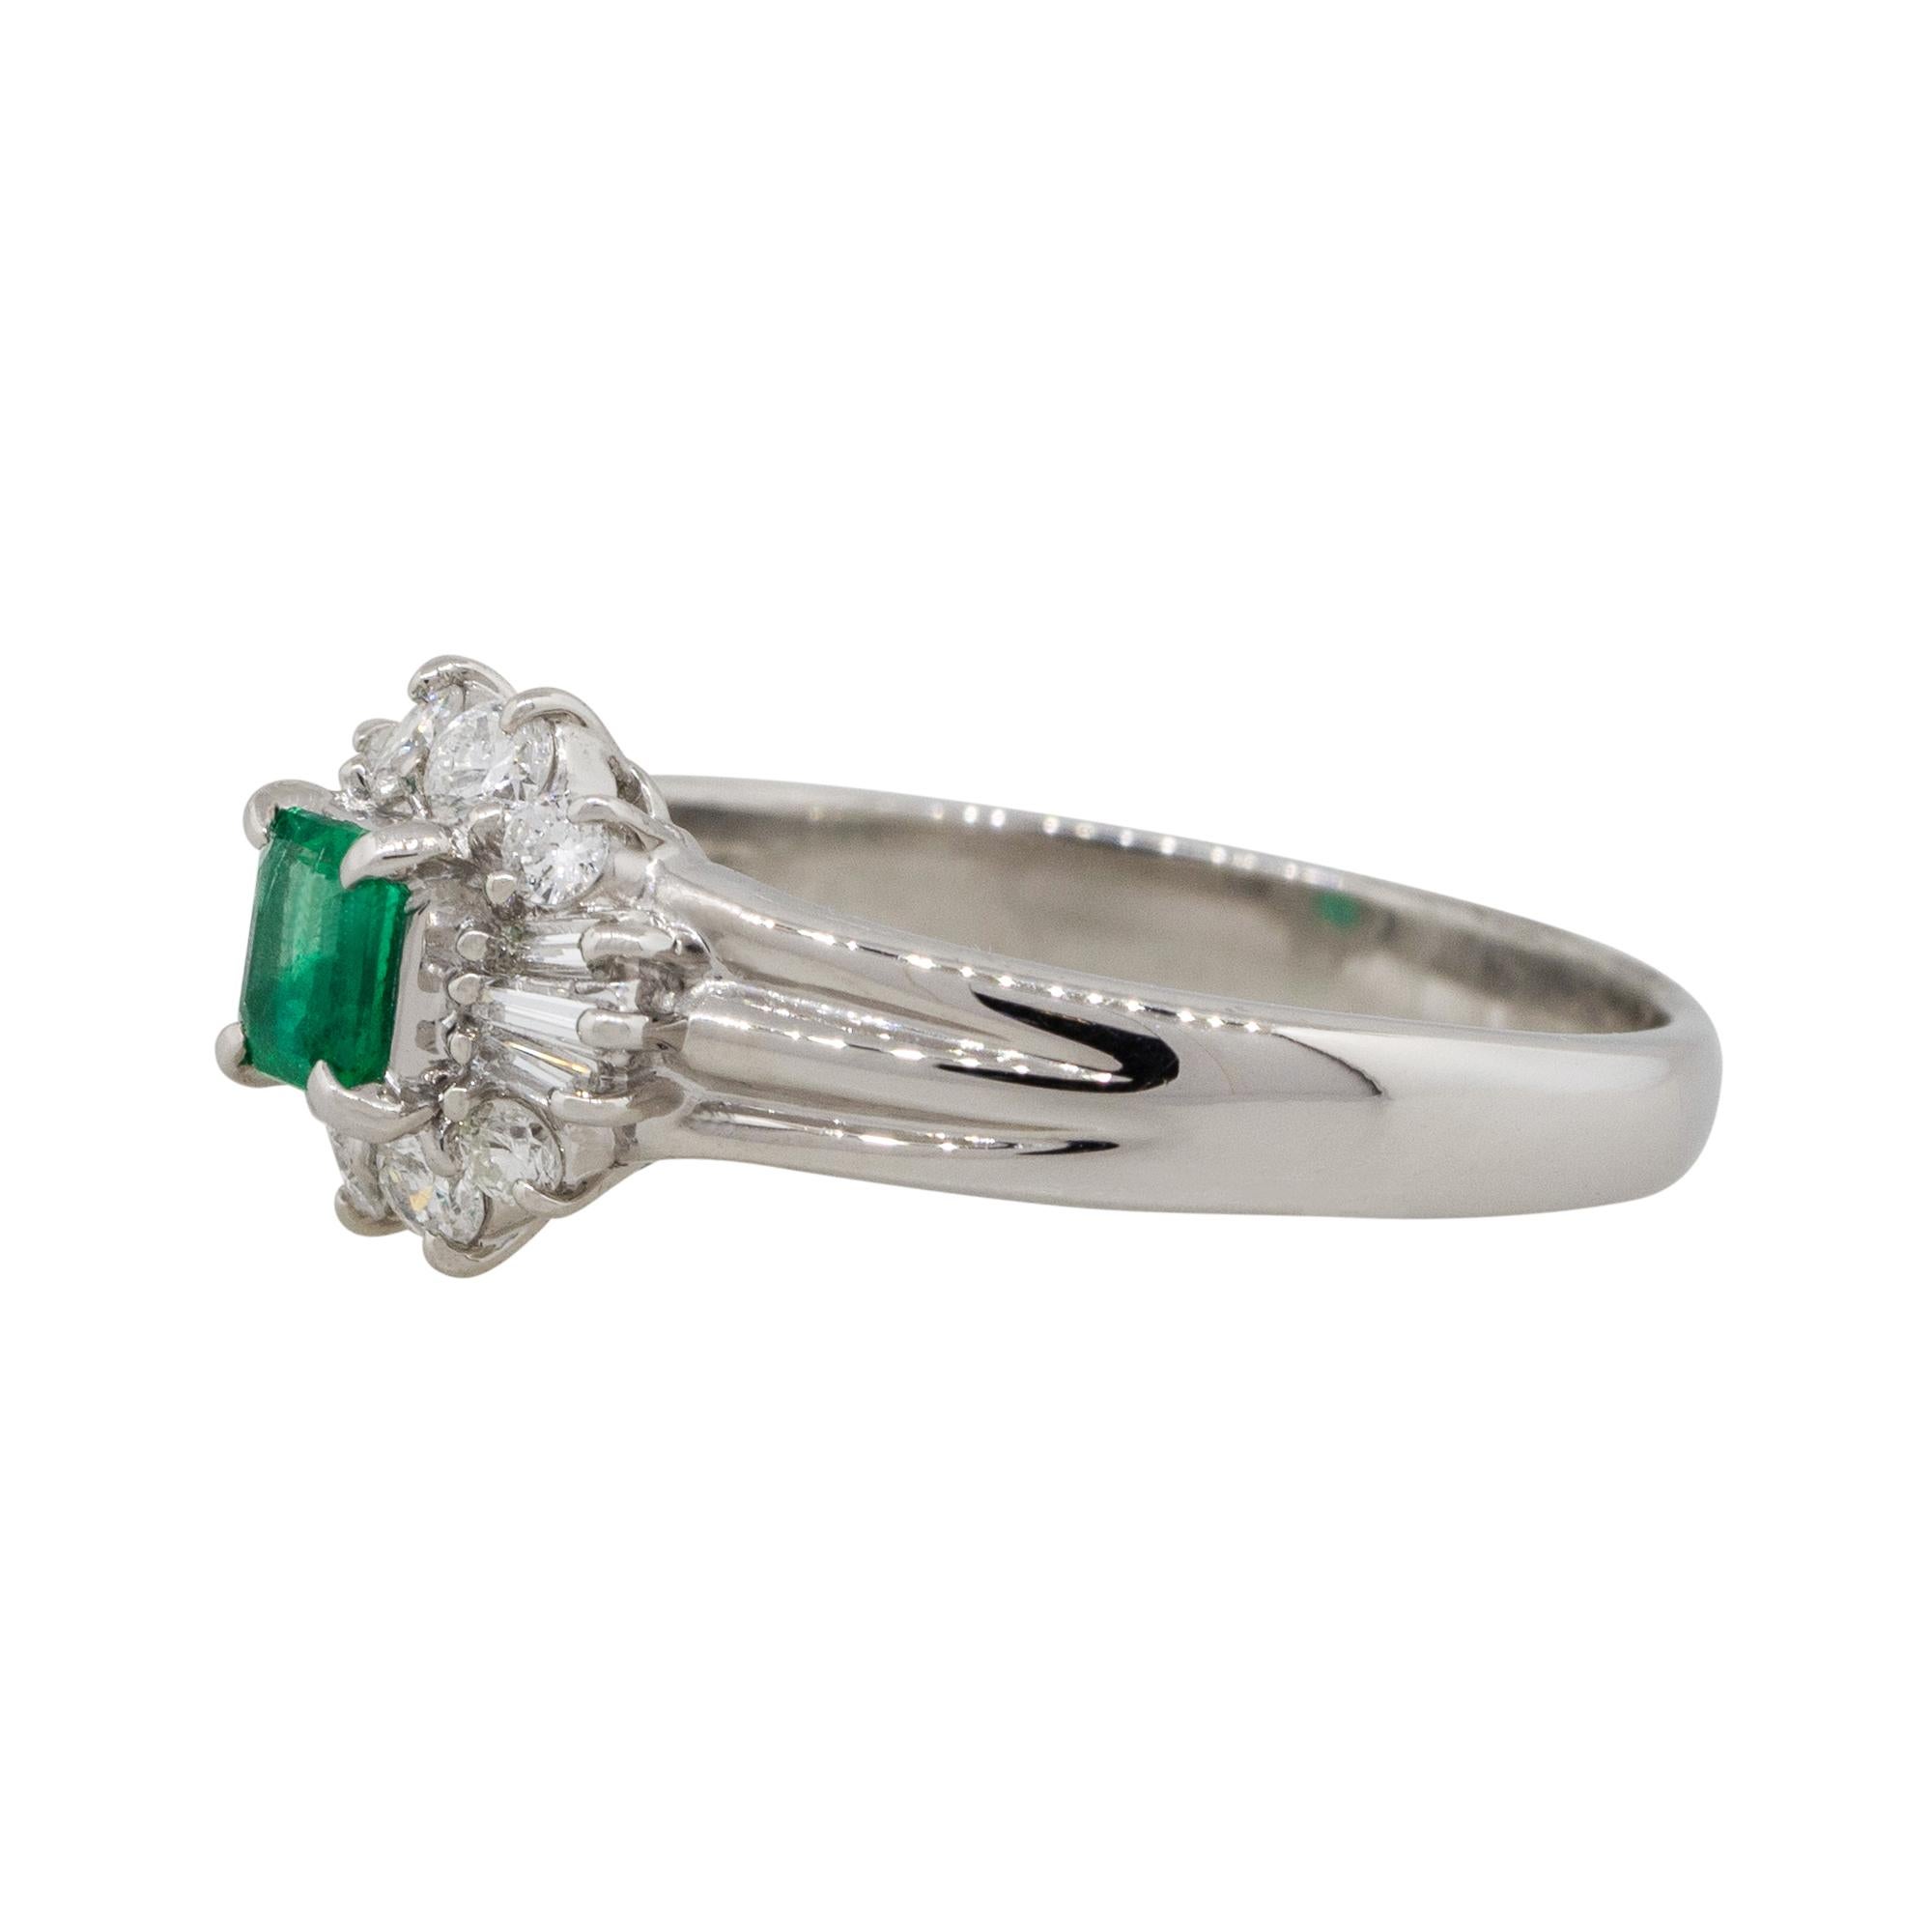 Material: Platinum
Gemstone details: Approx. 0.26ctw square shaped Emerald gemstone
Diamond details: Approx. 0.33ctw of round and baguette cut diamonds. Diamonds are G/H in color and VS in clarity
Ring Size: 7.25
Ring Measurements: 0.75